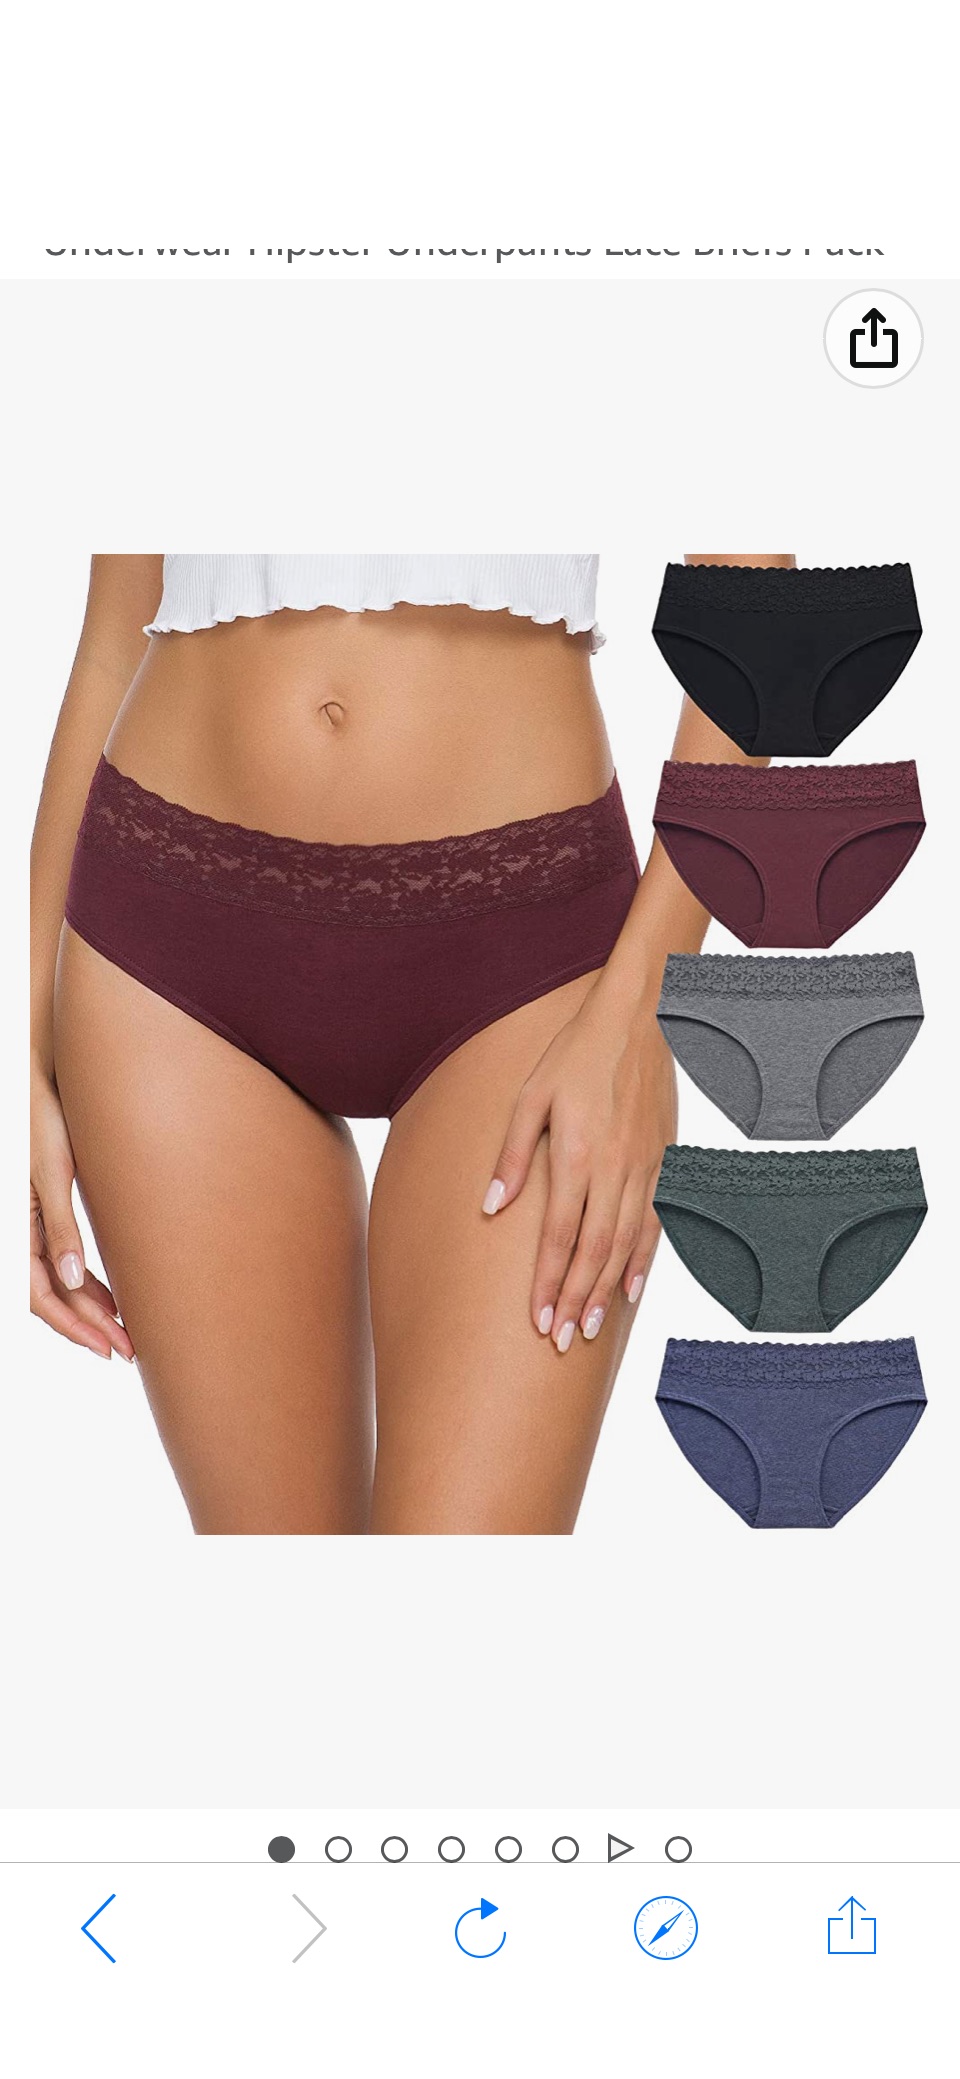 Wealurre Cotton Panties for Women Bikini Underwear Hipster Underpants Lace Briefs Pack(DarkSeries,XL) at Amazon Women’s Clothing store原价49